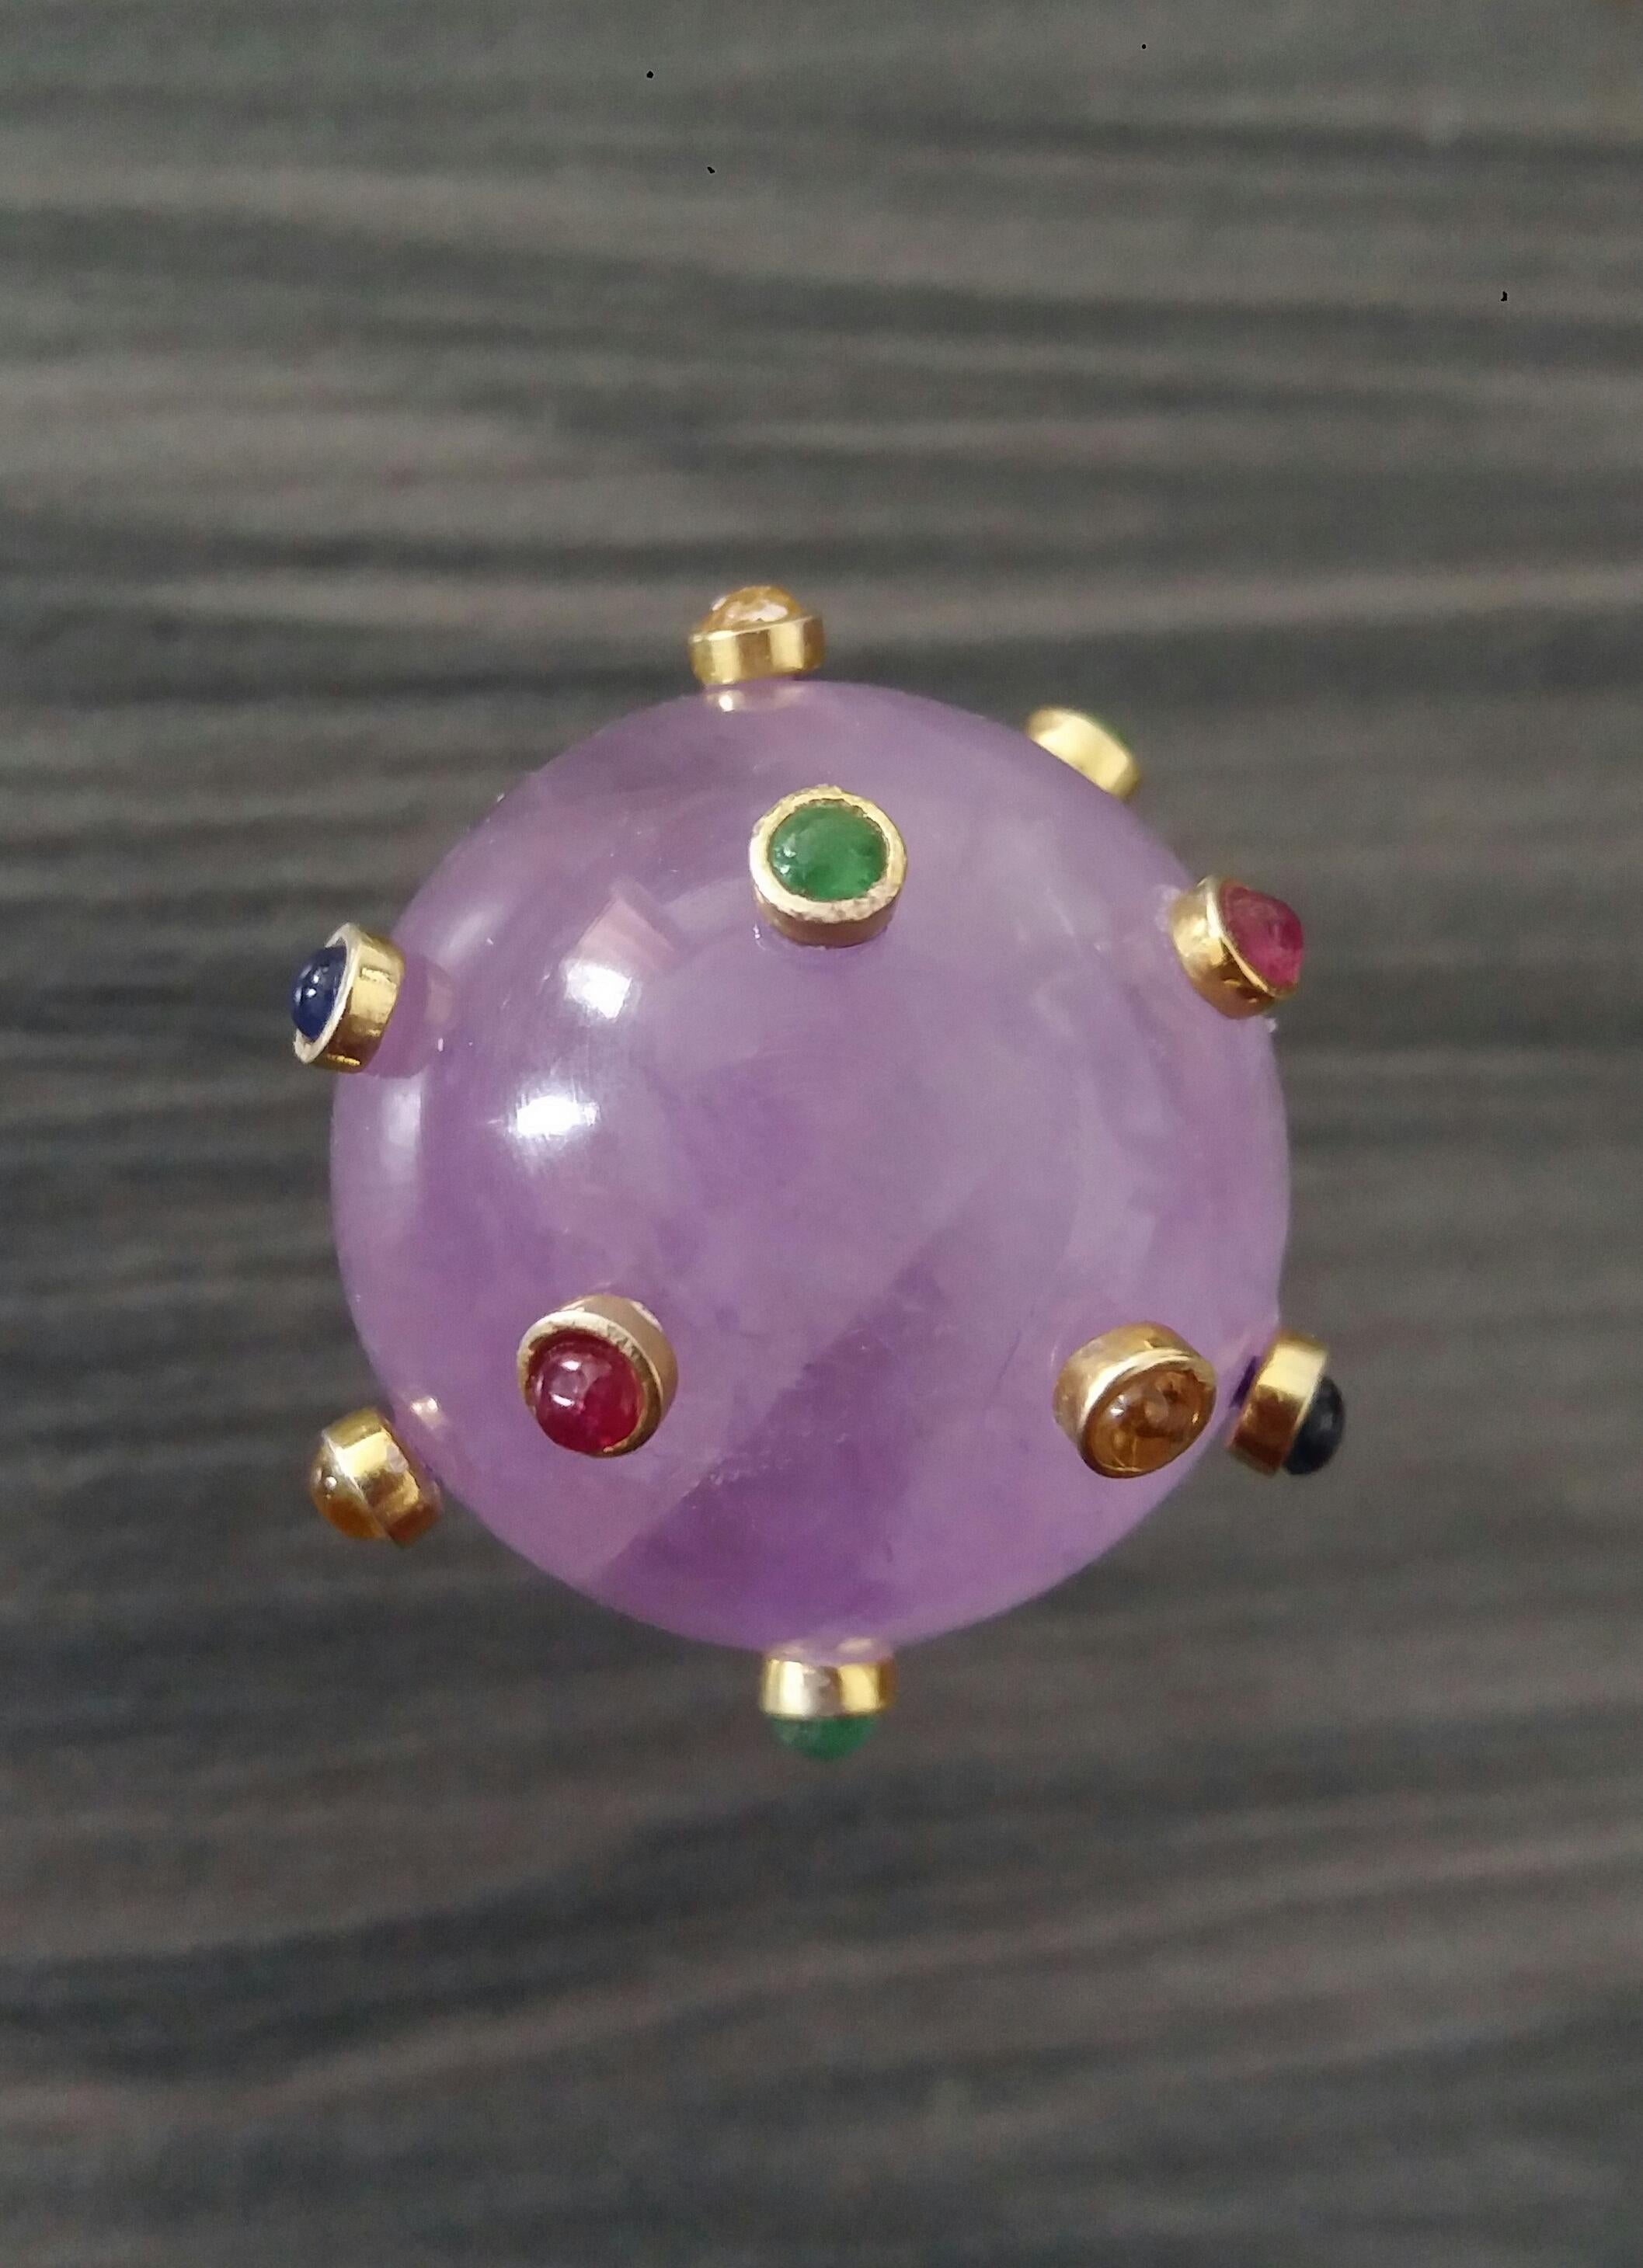 Extremely Stylish and Unique Ring composed by a Natural Amethyst  Sphere measuring 25 mm in diameter and weighing 115 Carats ,decorated with 15 small round Rubies,Emeralds,Blue and Yellow Sapphires set in 14K yellow gold bezels.

In 1978 our